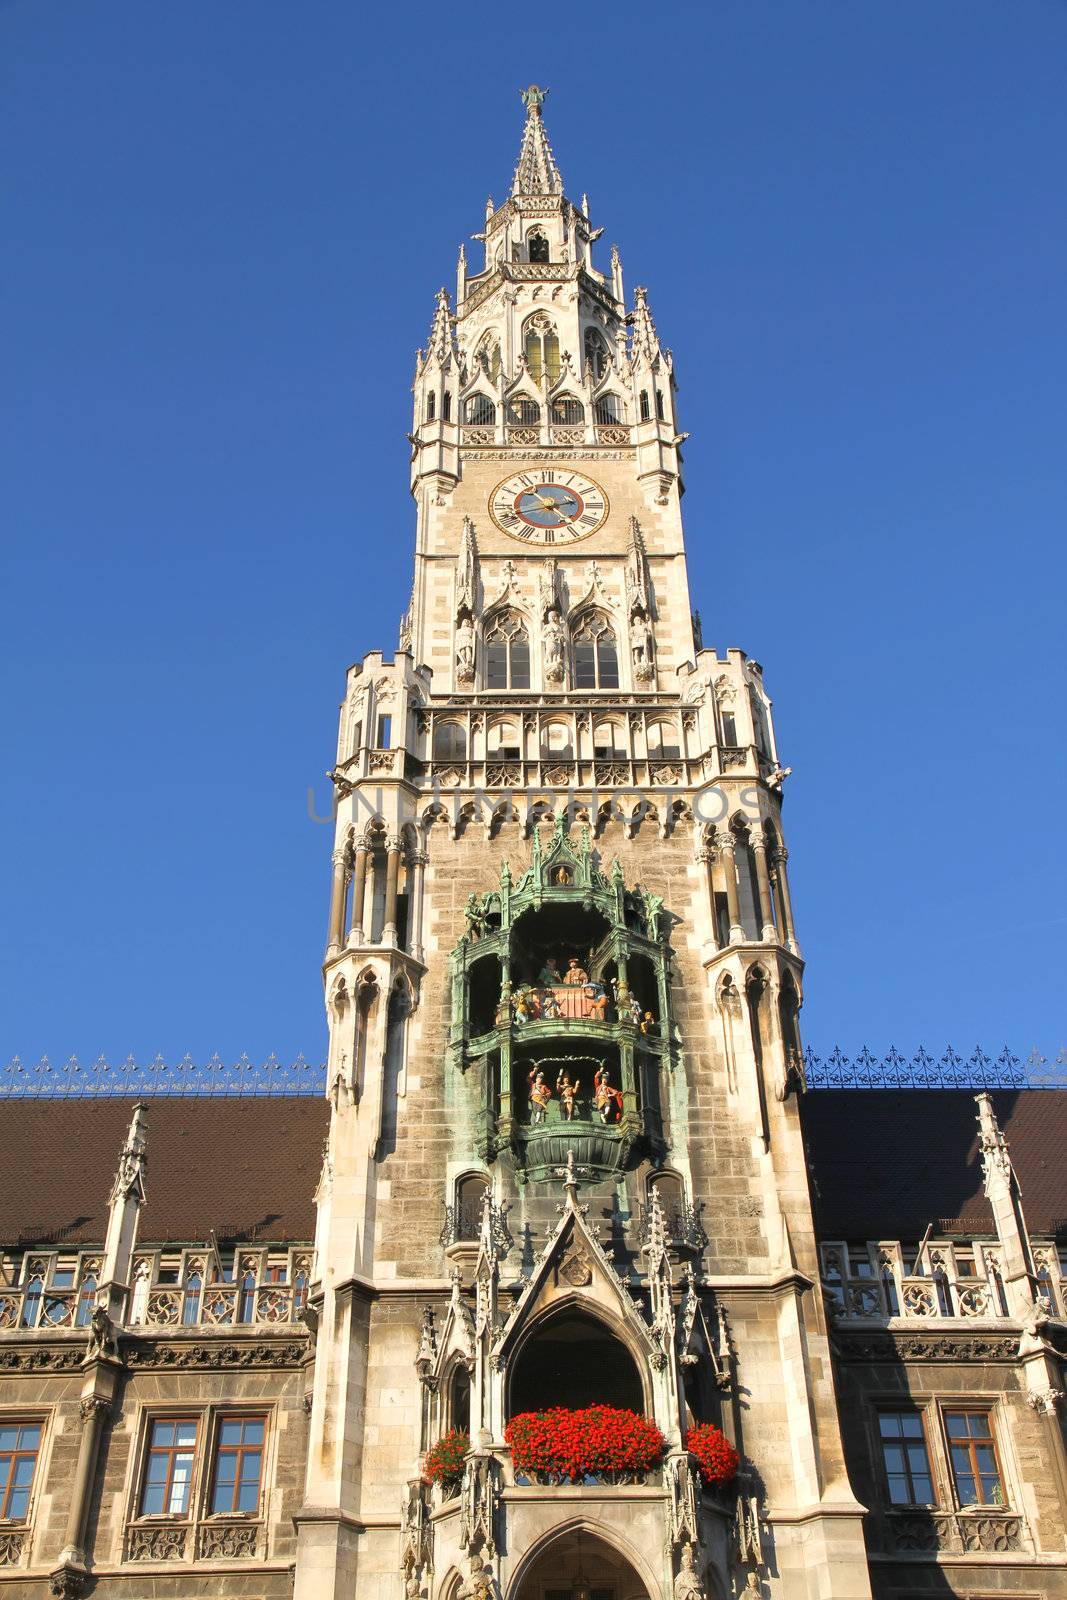 The Rathaus of Munich by Spectral